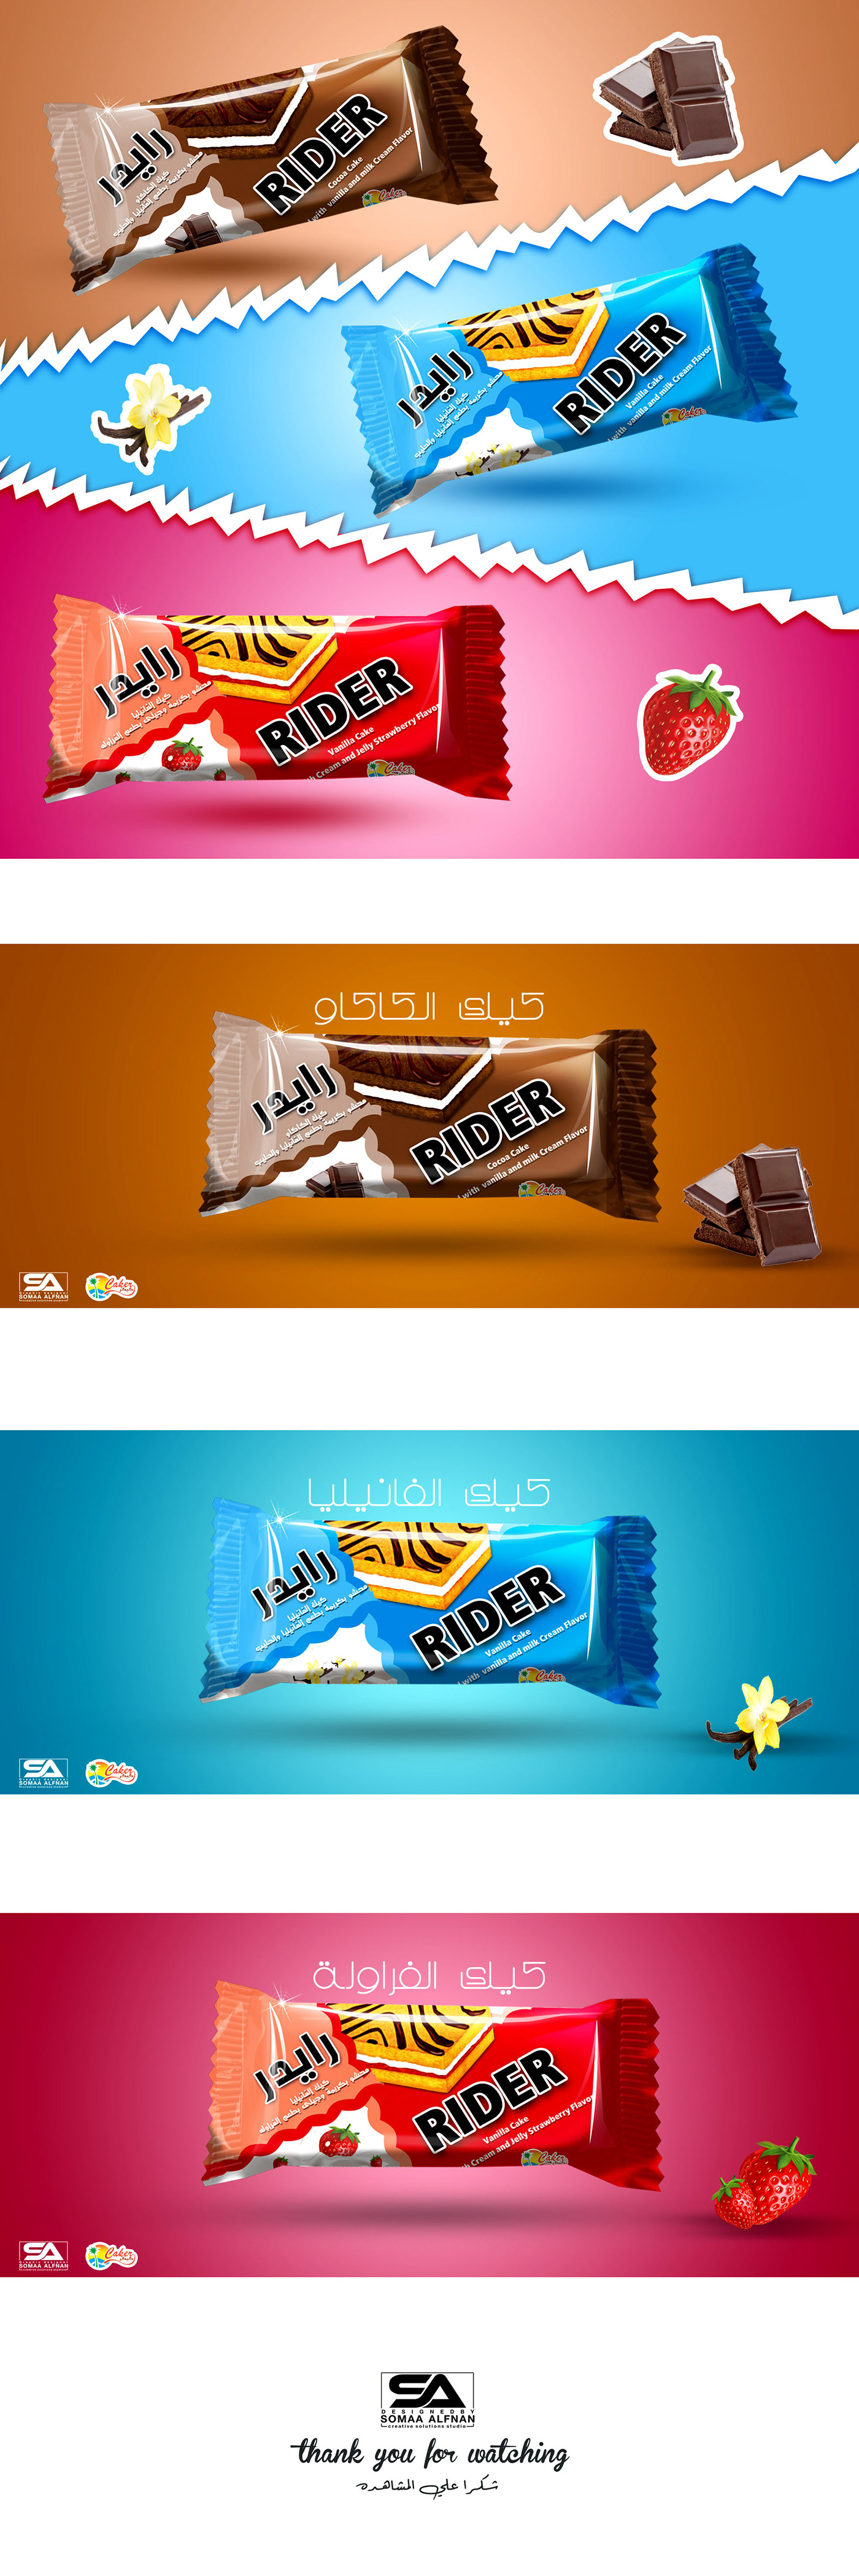 RIDER-cake rider cake Food product strawberries chocolates cacao chocolate packaging Packaging packaging design